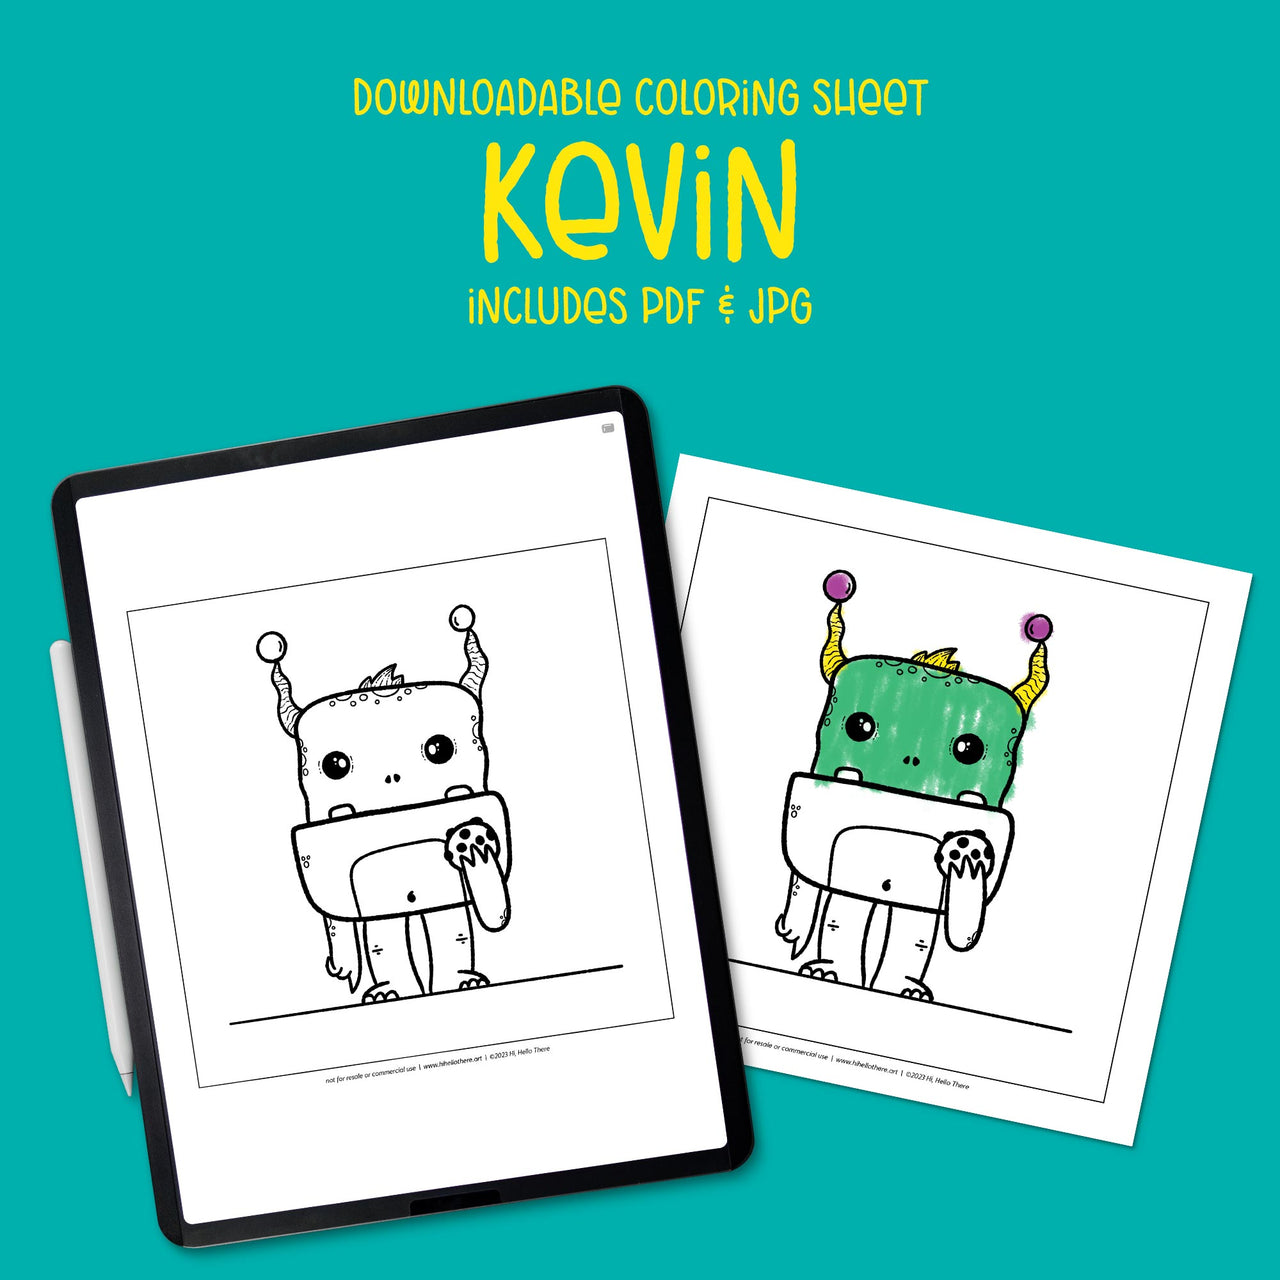 Kevin Downloadable Coloring Sheet